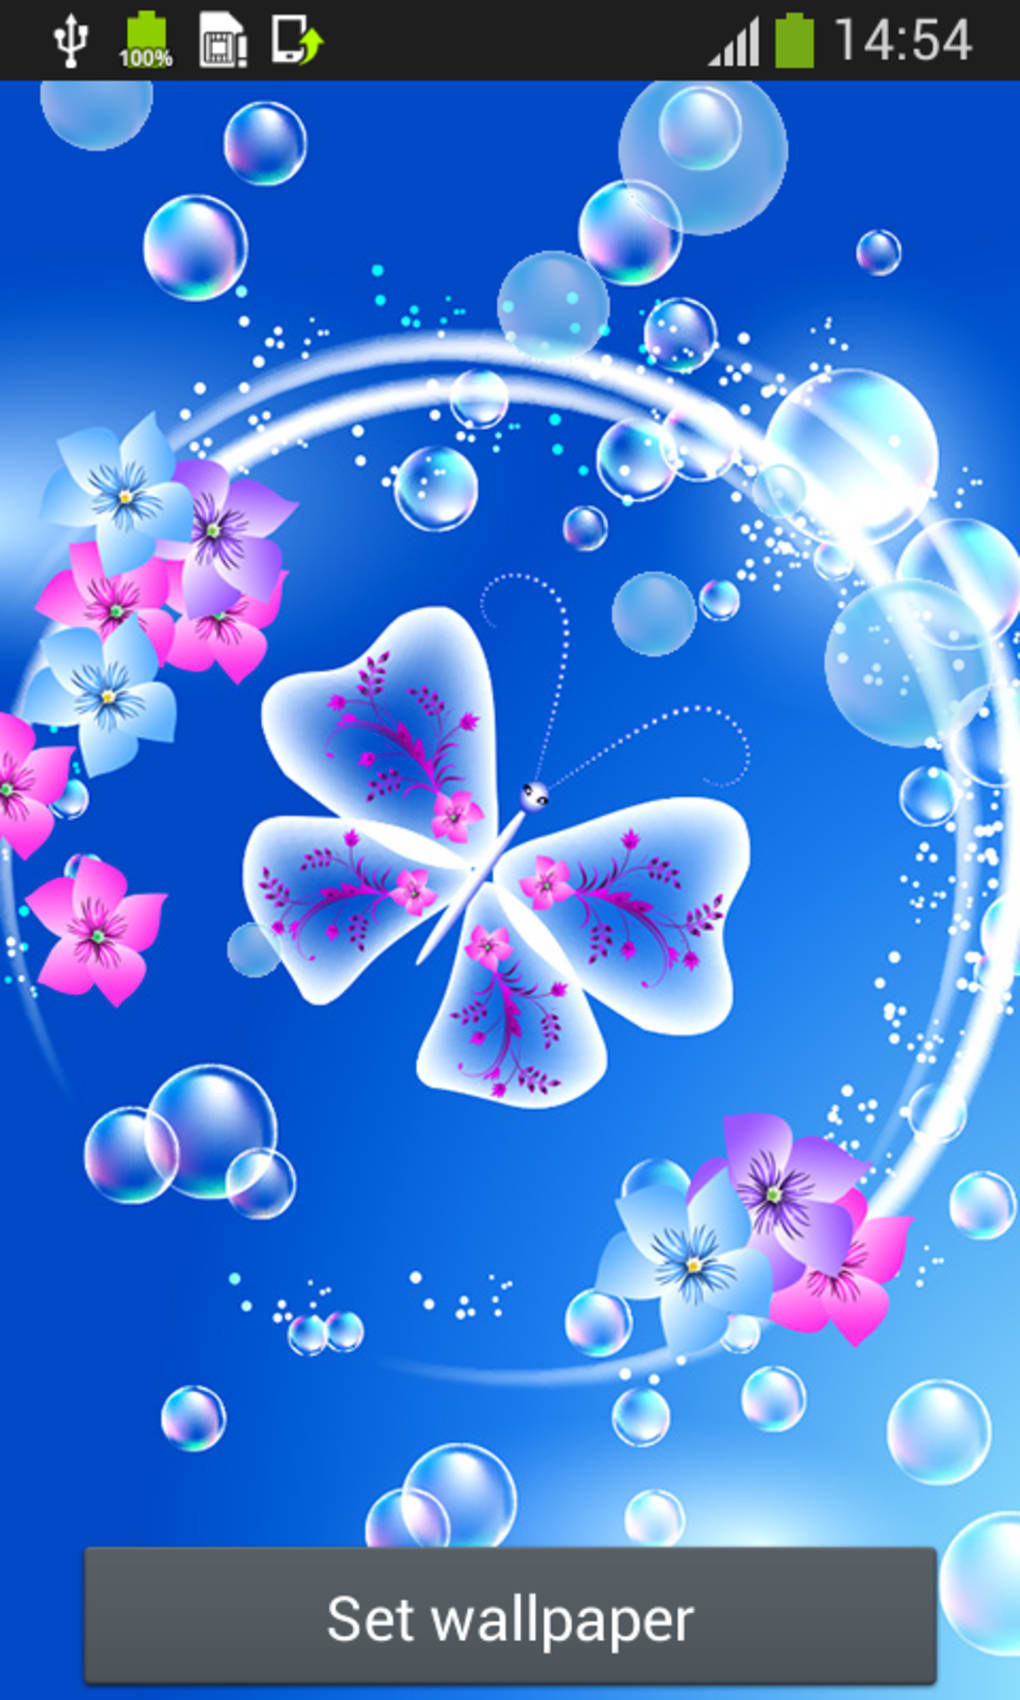 live wallpapers,blue,sky,butterfly,violet,purple